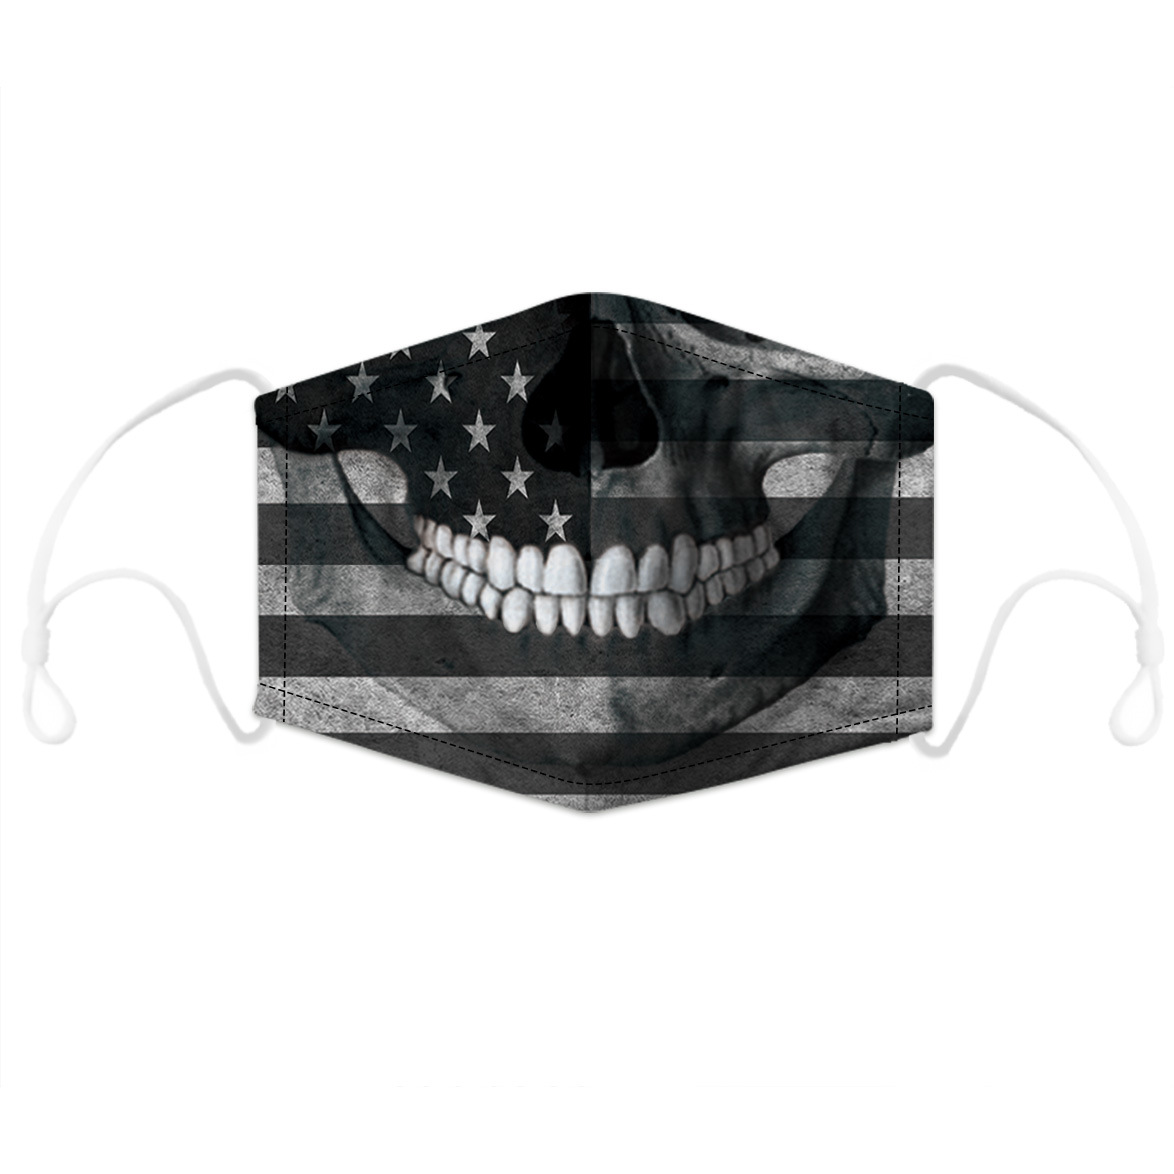 Unisex Fashion Face Covering,Washable Reusable 3D Printed Mouth Protector for Adults